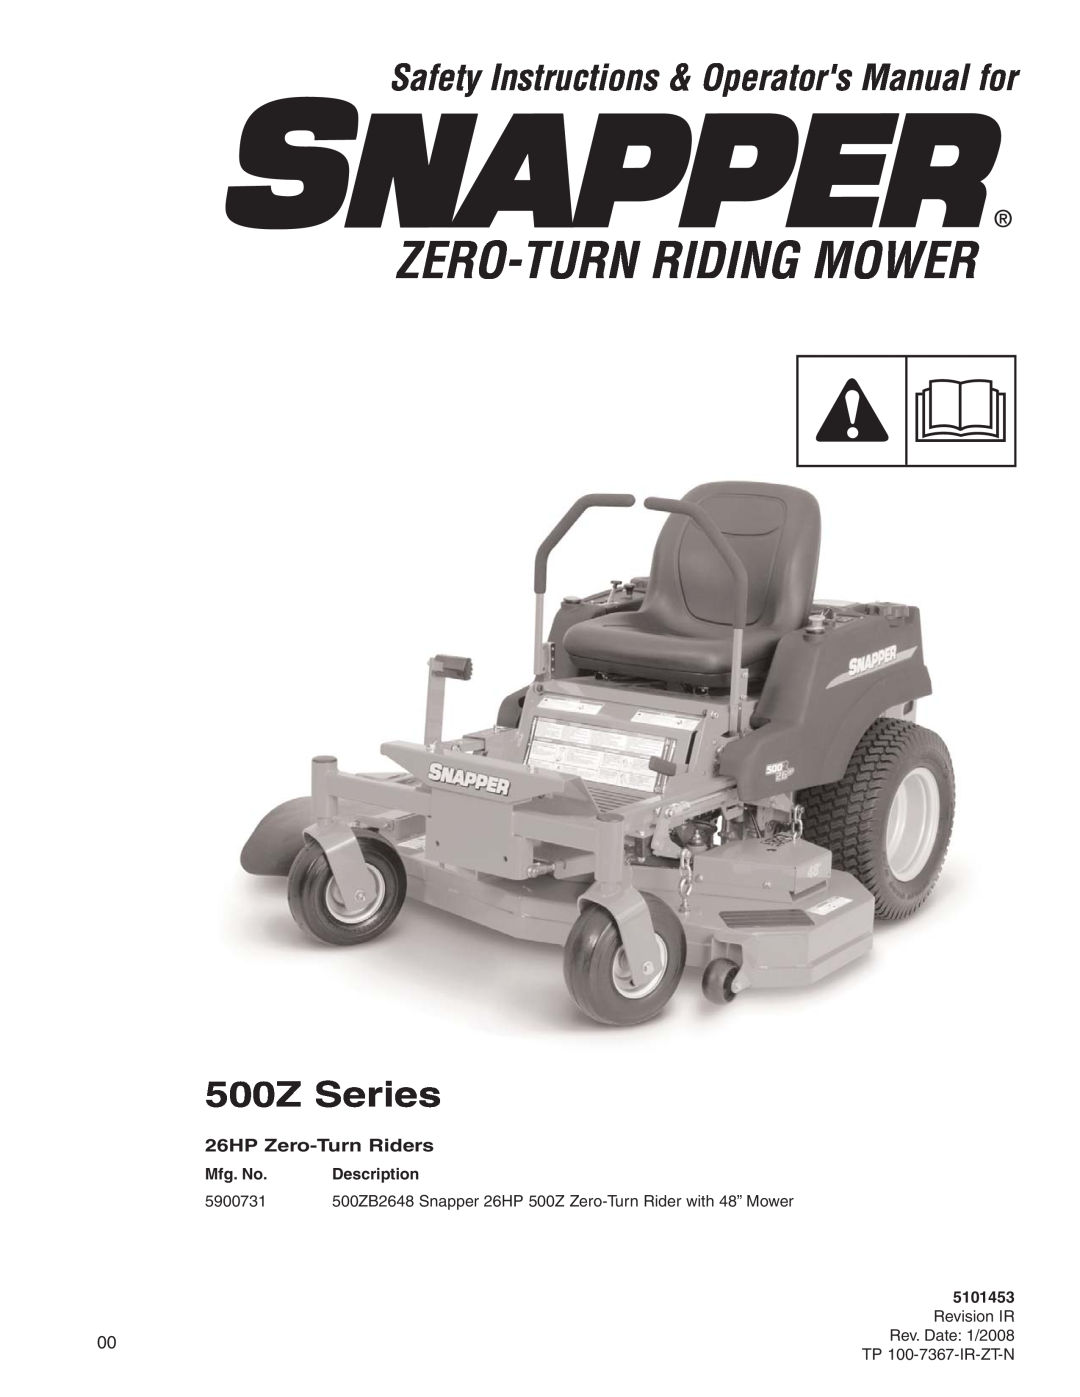 Snapper manual Zero-Turn Riding Mower, Safety Instructions & Operators Manual for, 500Z Series, 26HP Zero-Turn Riders 